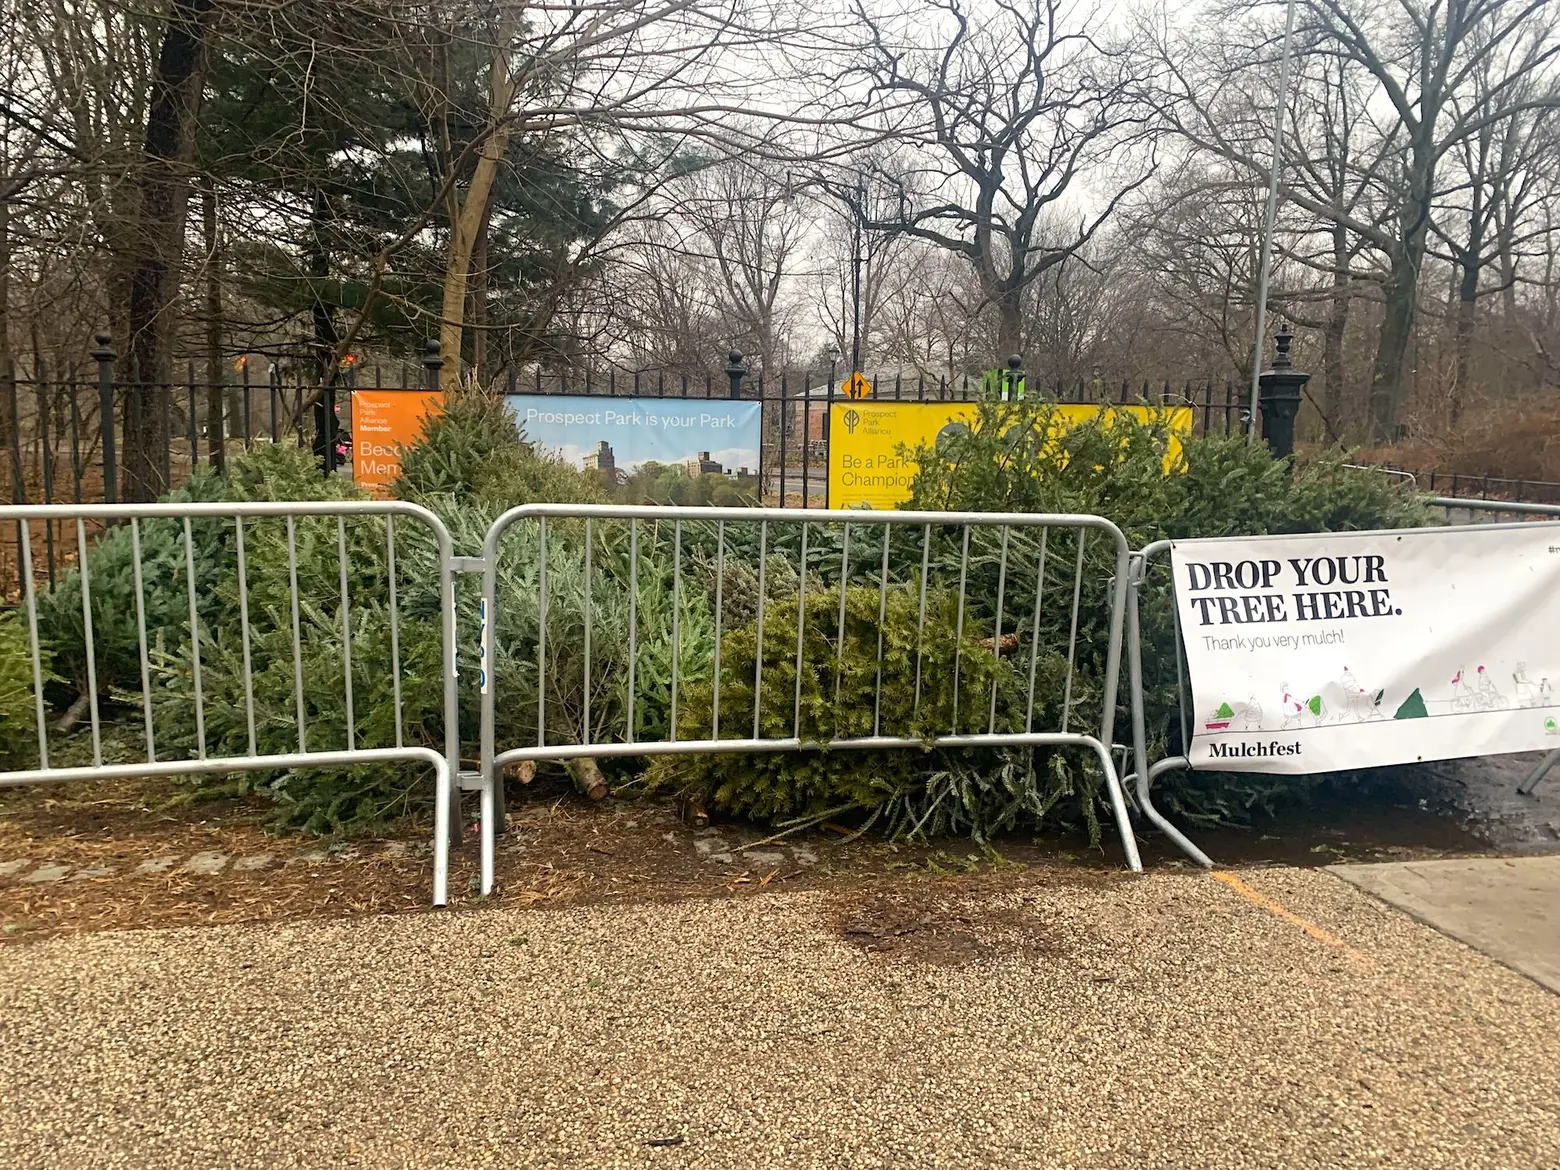 Say ‘fir-well’ to your Christmas tree: Mulchfest is back